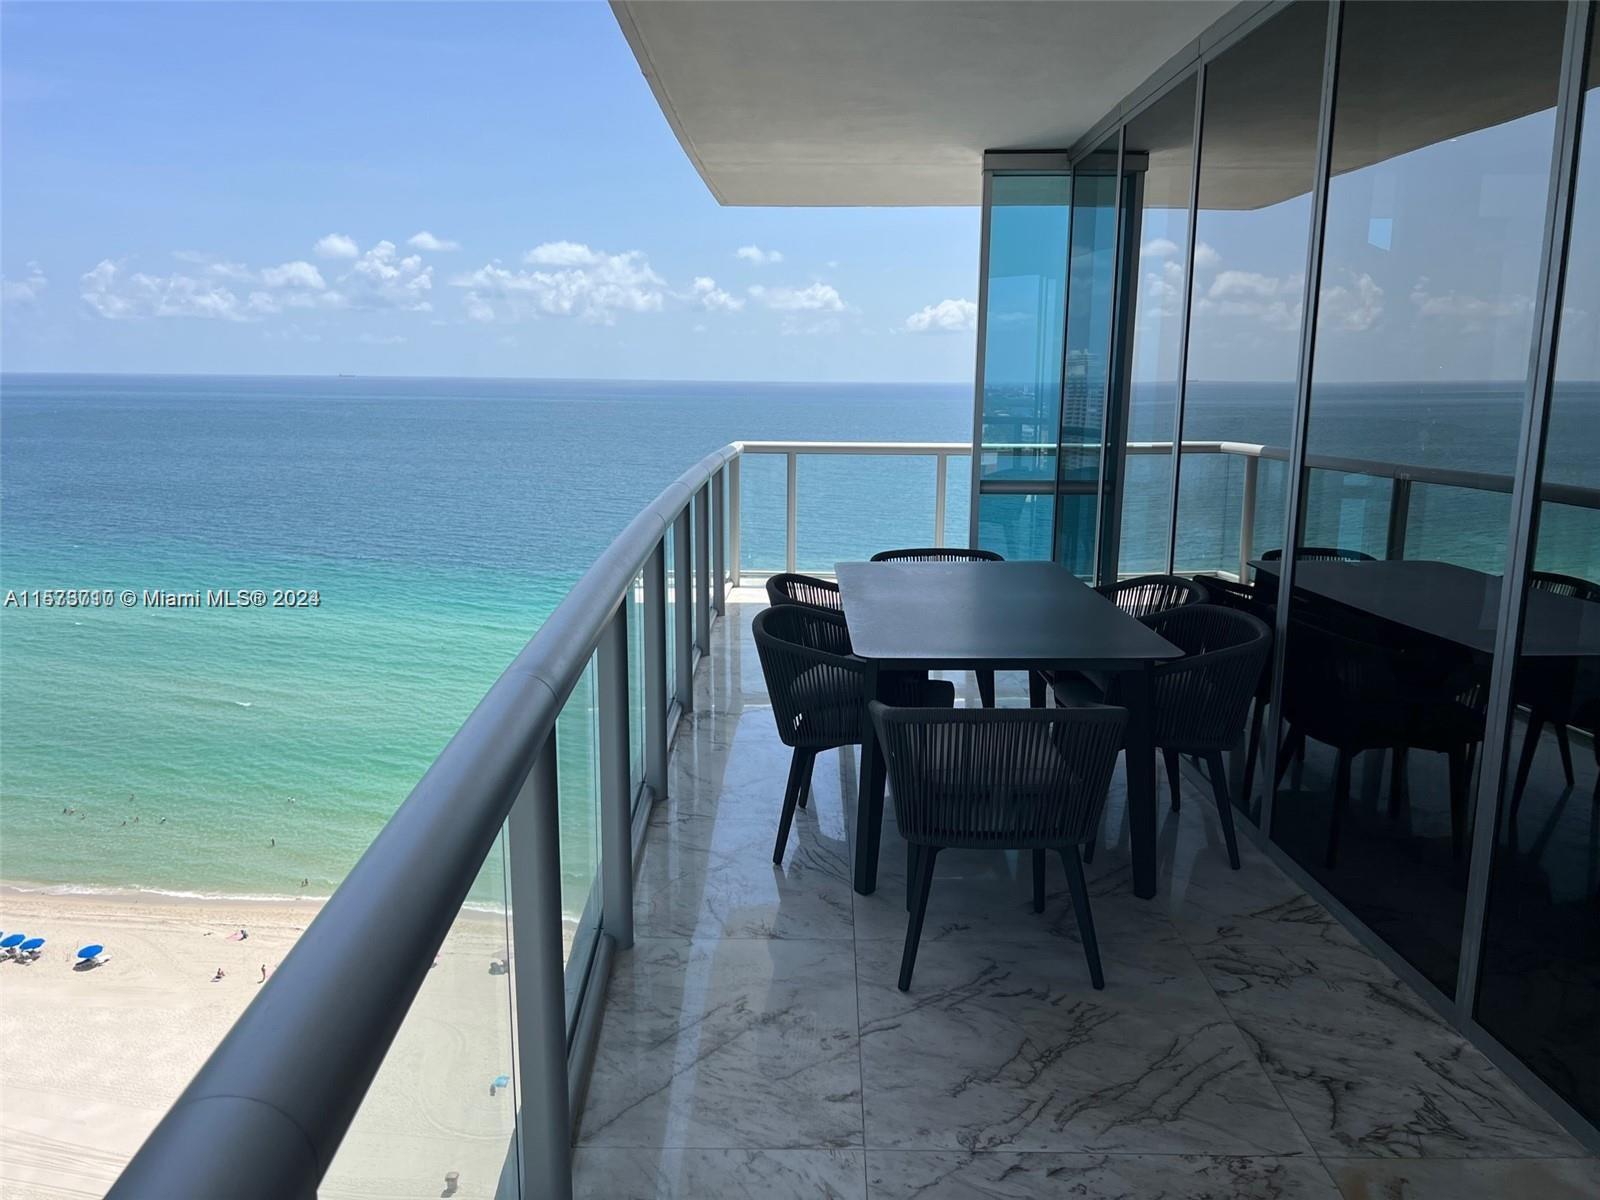 Oceanfront luxury condo at Jade Ocean in beautiful Sunny Isles Beach.  Bang And Olufsen Electronics, Interior features 3 bedroom, 3 and a half baths, kitchen, dining room, in unit laundry and a large patio facing the ocean.

for showings please text Hernan Golod 305-370-2176